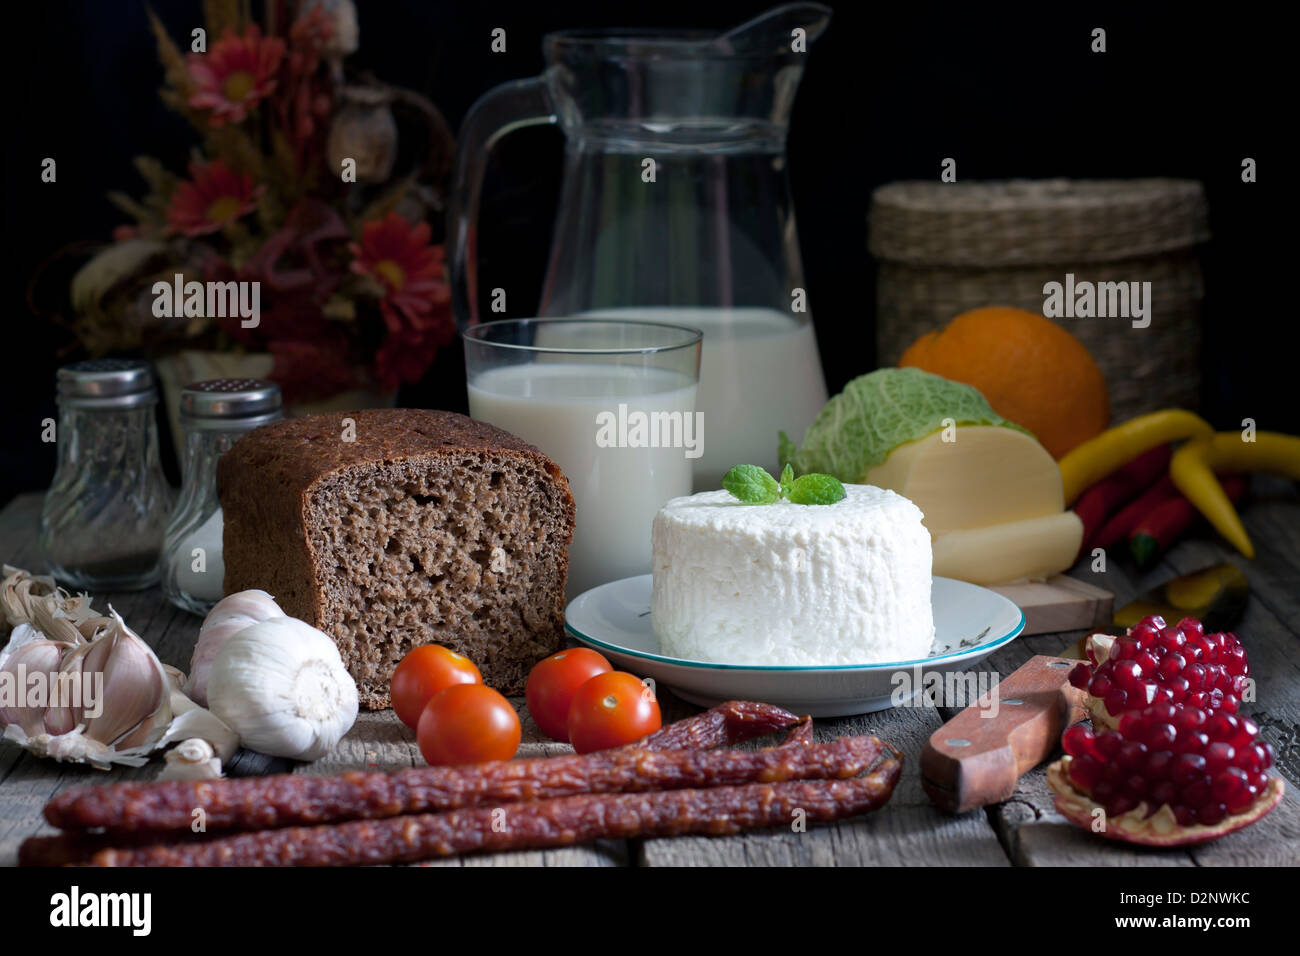 Food still life concept on vintage old retro wooden boards Stock Photo